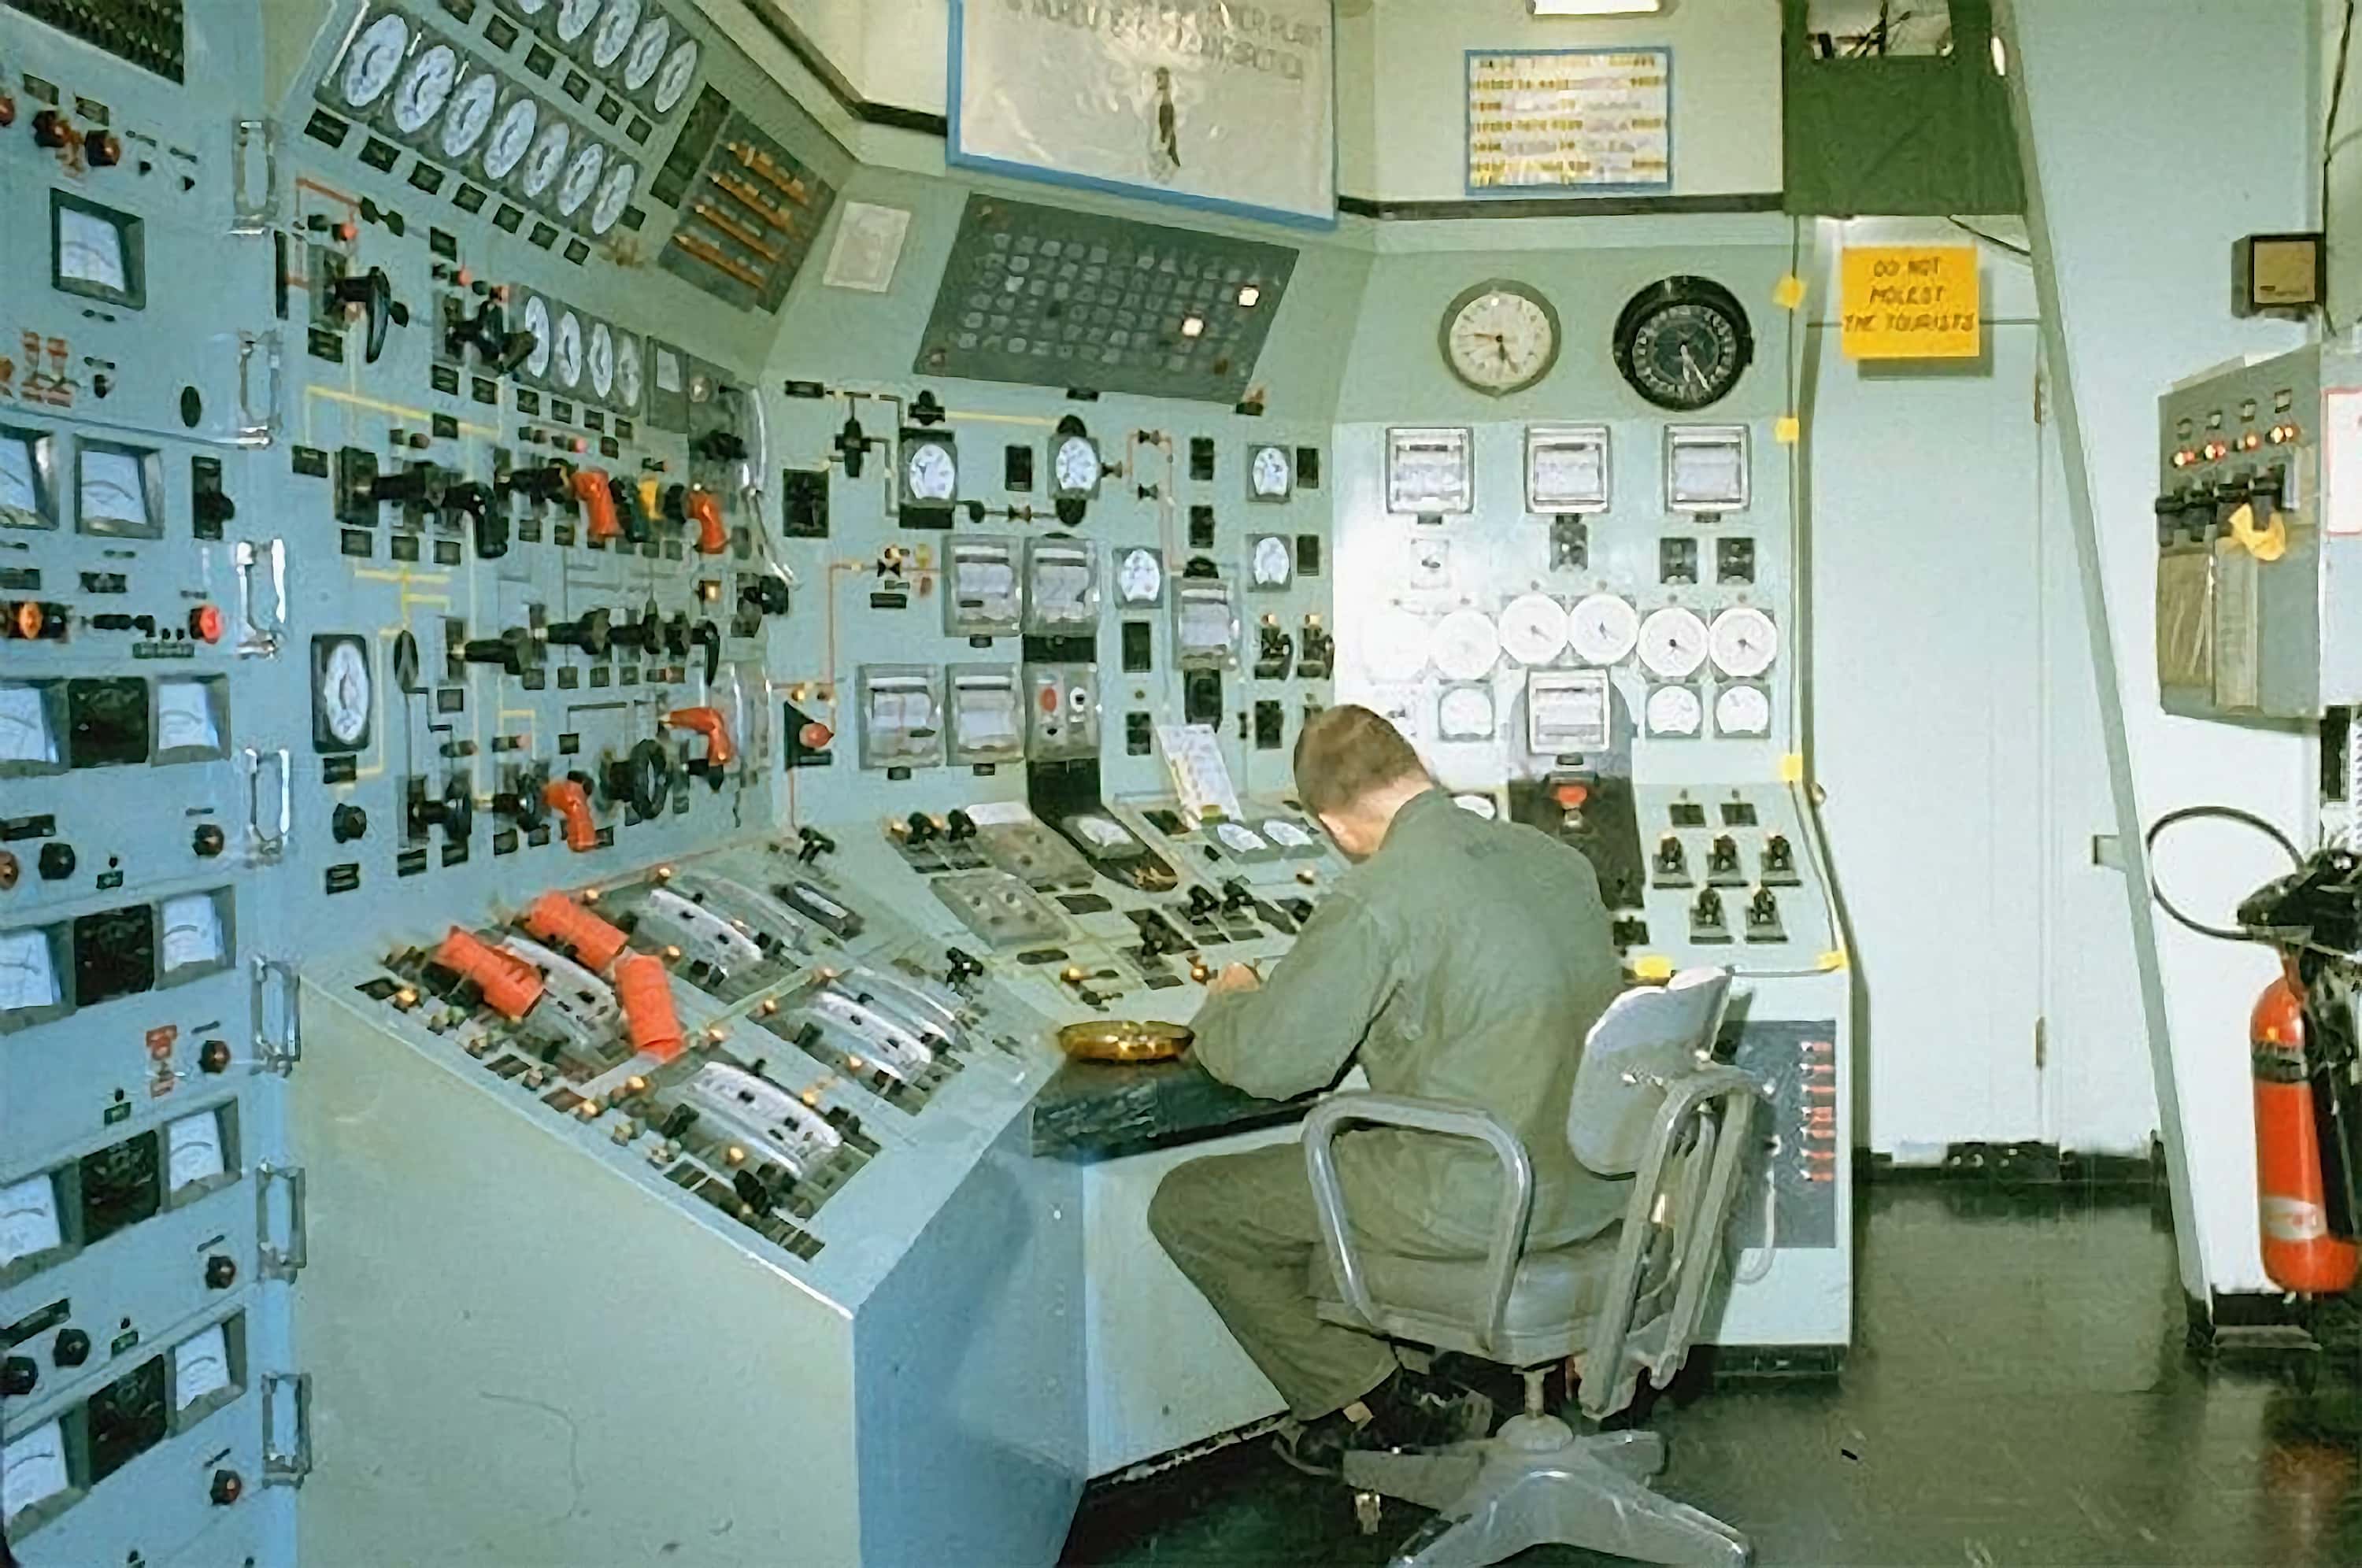 The control room of PM 3a Nukey Poo in 1965